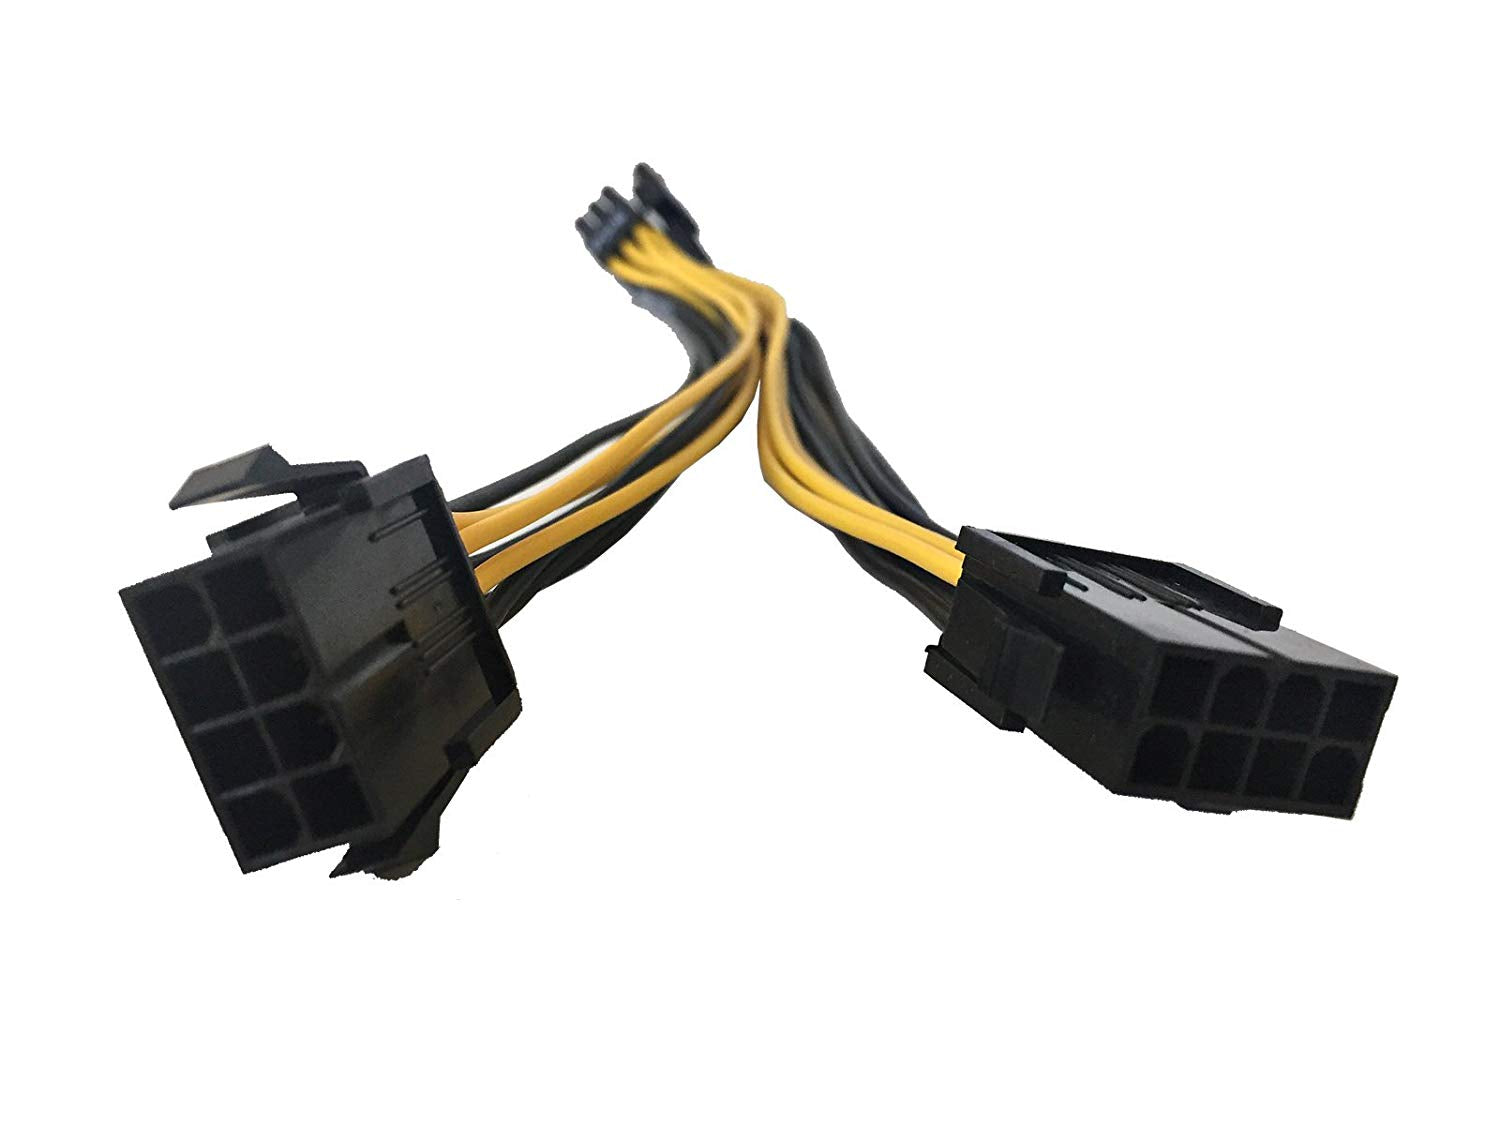 9" (9-Inch) 8(6+2-Pin) PCIe Male to Dual 8-Pin PCIe Female Splitter Power Cable Adapter 18AWG